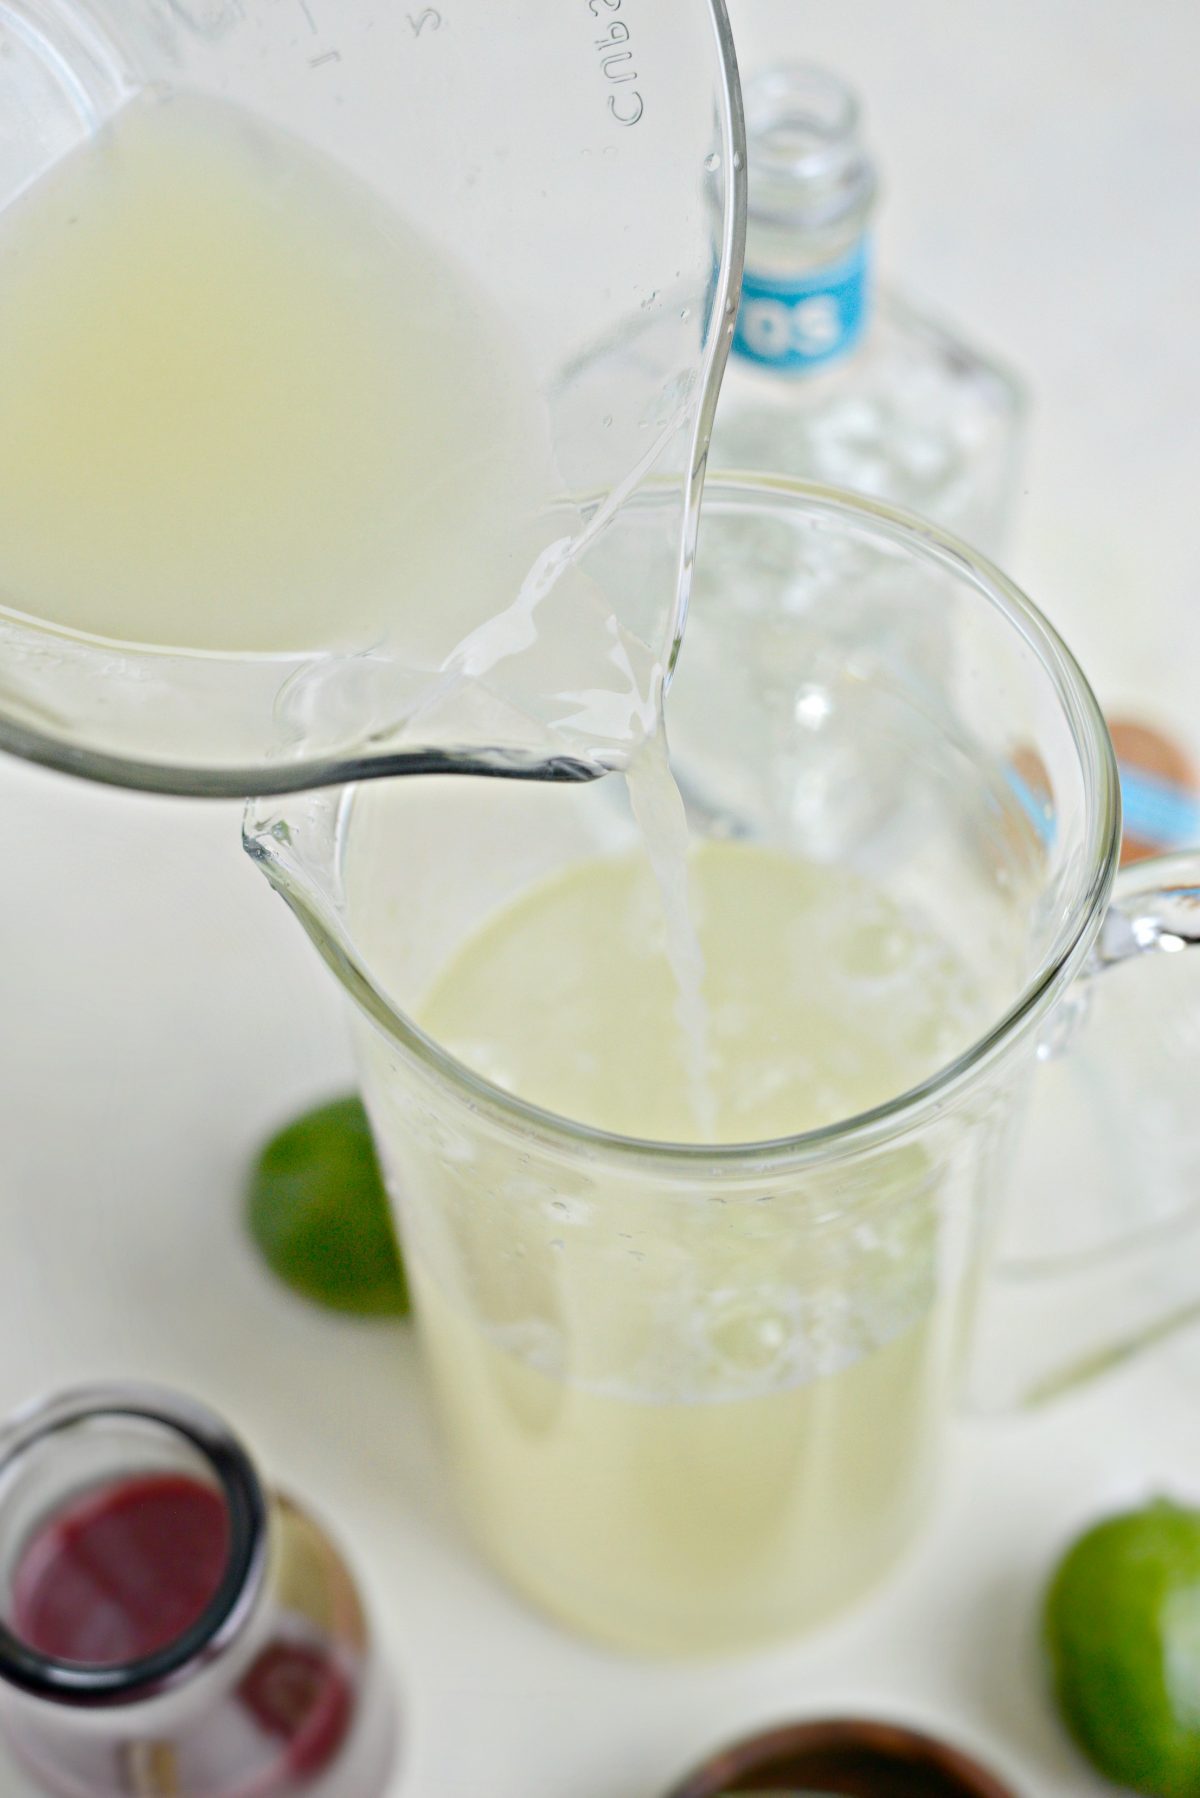 pour in lime juice.